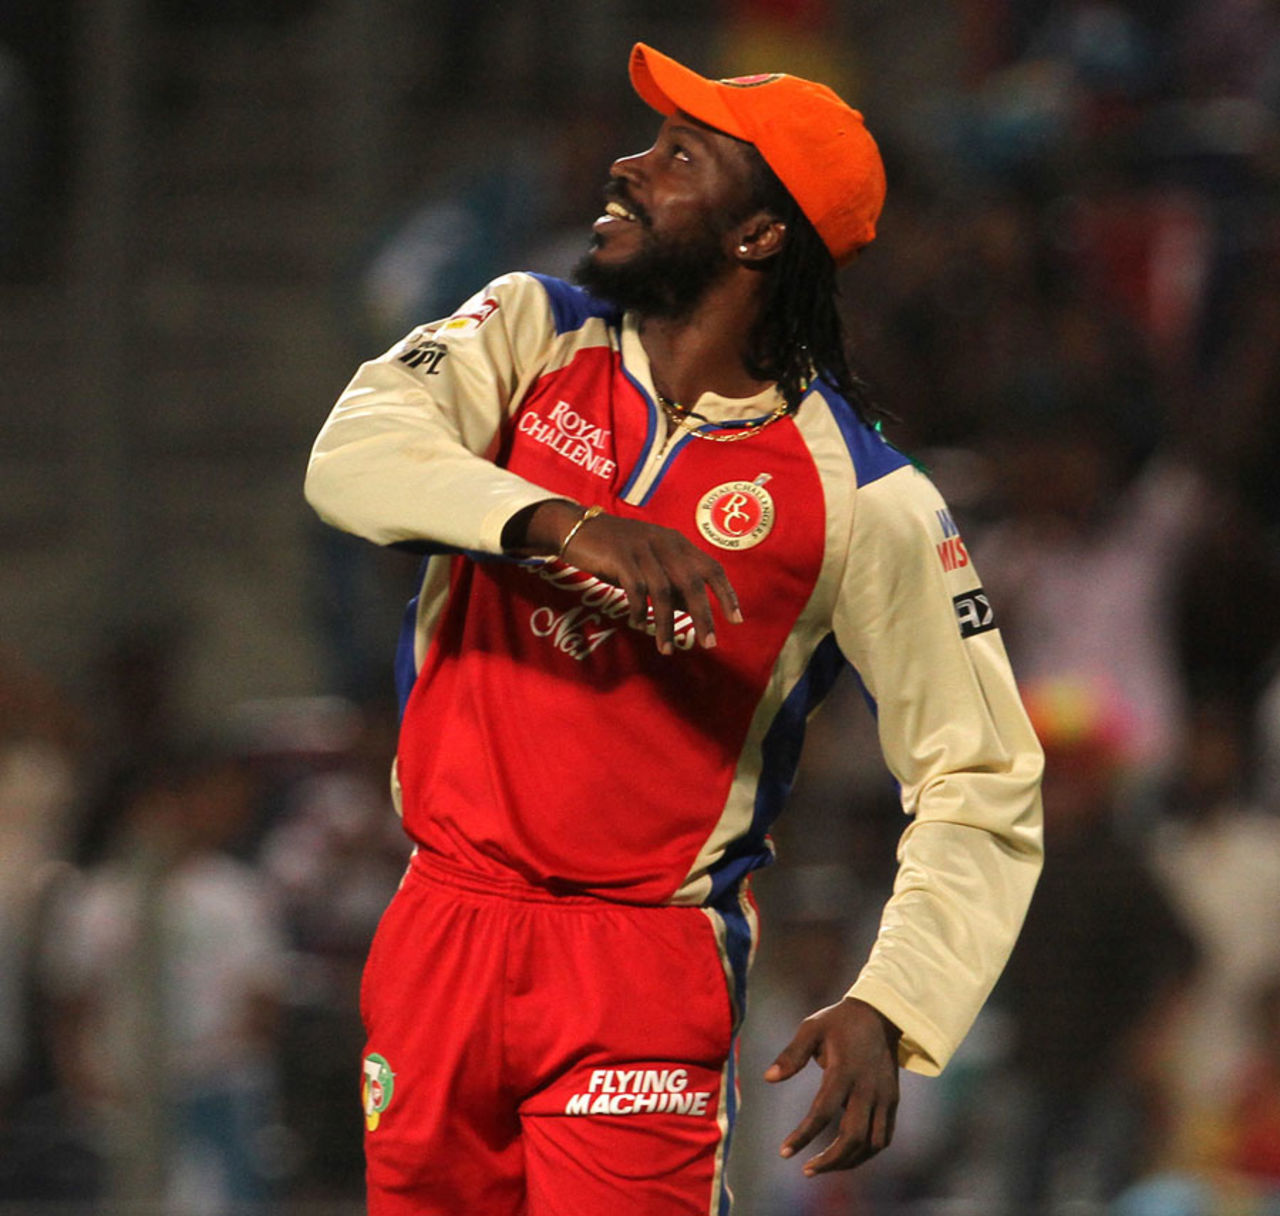 Chris Gayle took the catch to dismiss Angelo Mathews, Pune Warriors v Royal Challengers Bangalore, IPL 2013, Pune, May 2, 2013